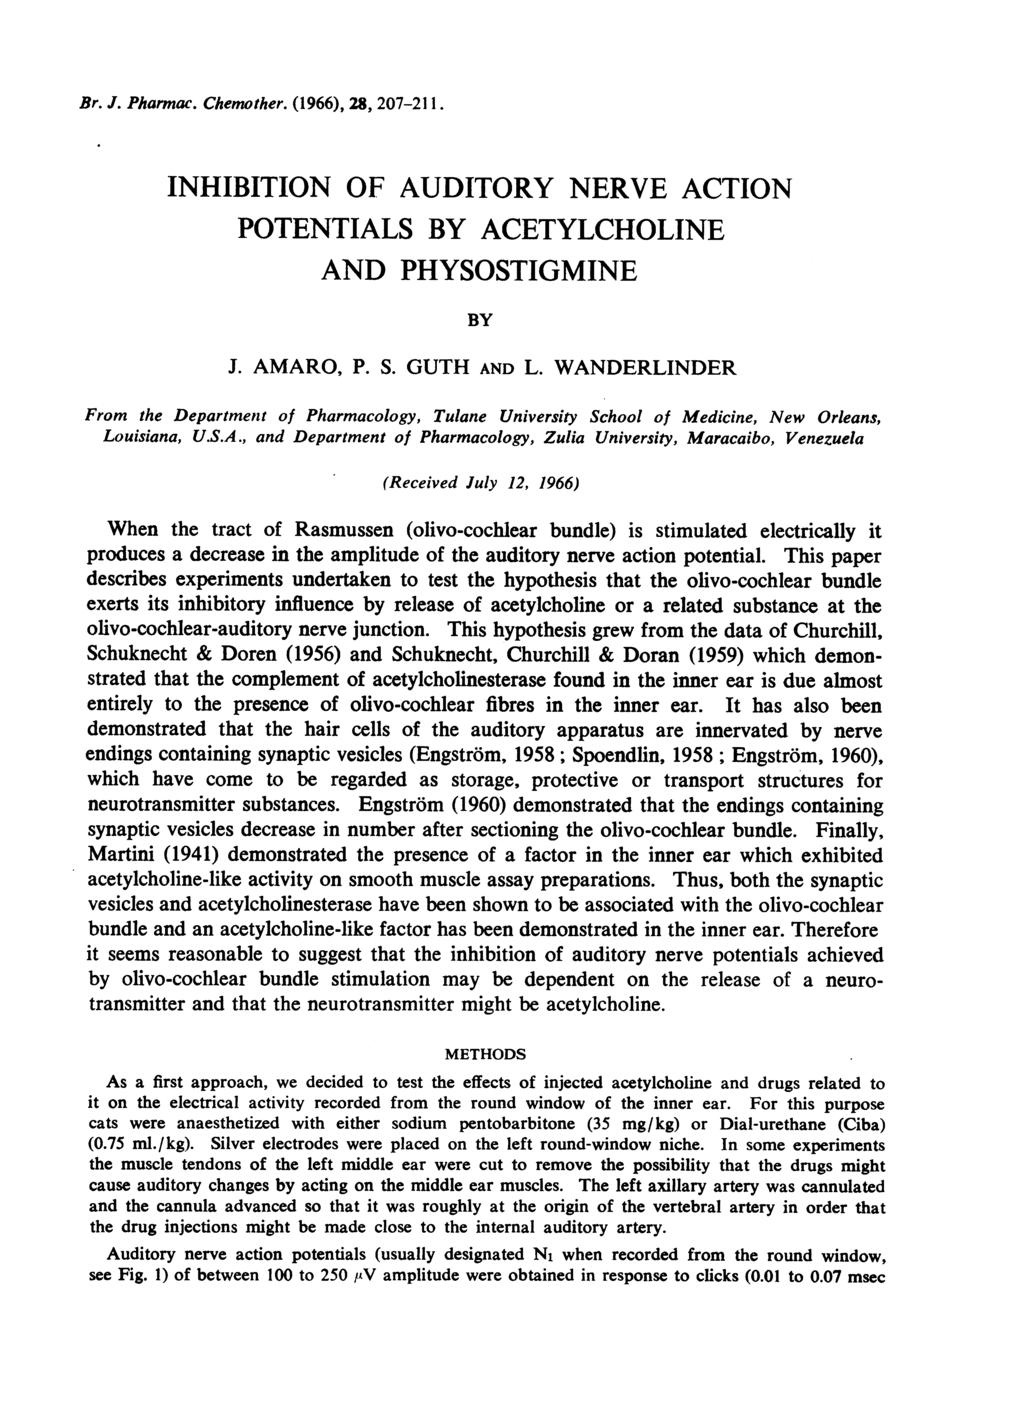 Br. J. Pharmac. Chemother. (1966), 28, 207-211. INHIBITION OF AUDITORY NERVE ACTION POTENTIALS BY ACETYLCHOLINE AND PHYSOSTIGMINE BY J. AMARO, P. S. GUTH AND L.